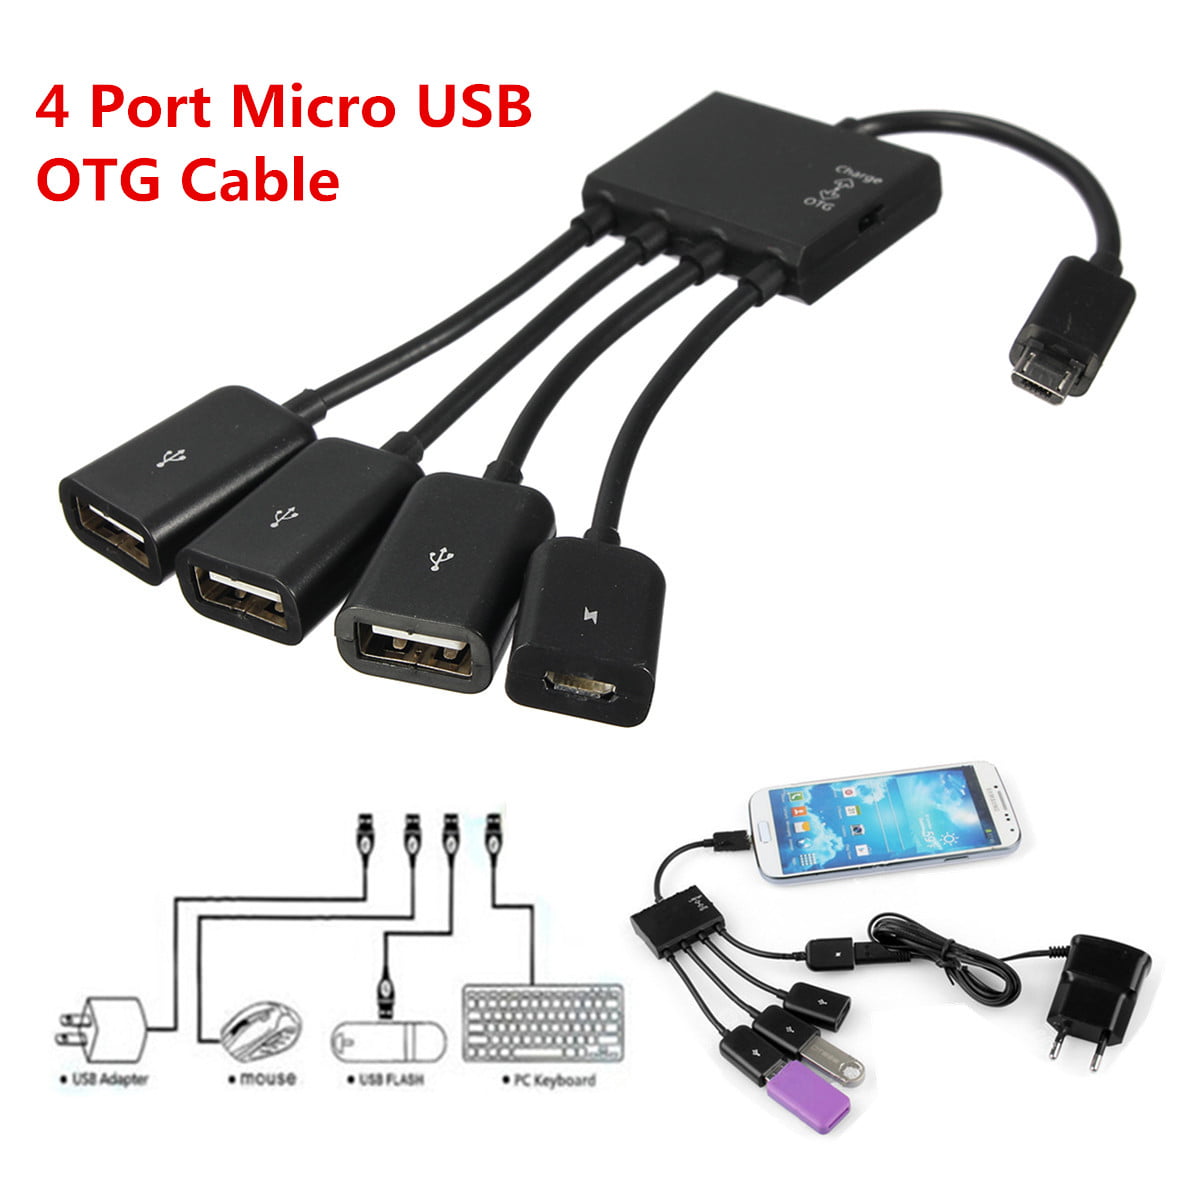 PRO OTG Power Cable Works for LG G Pad X II 8.0 Plus with Power Connect to Any Compatible USB Accessory with MicroUSB